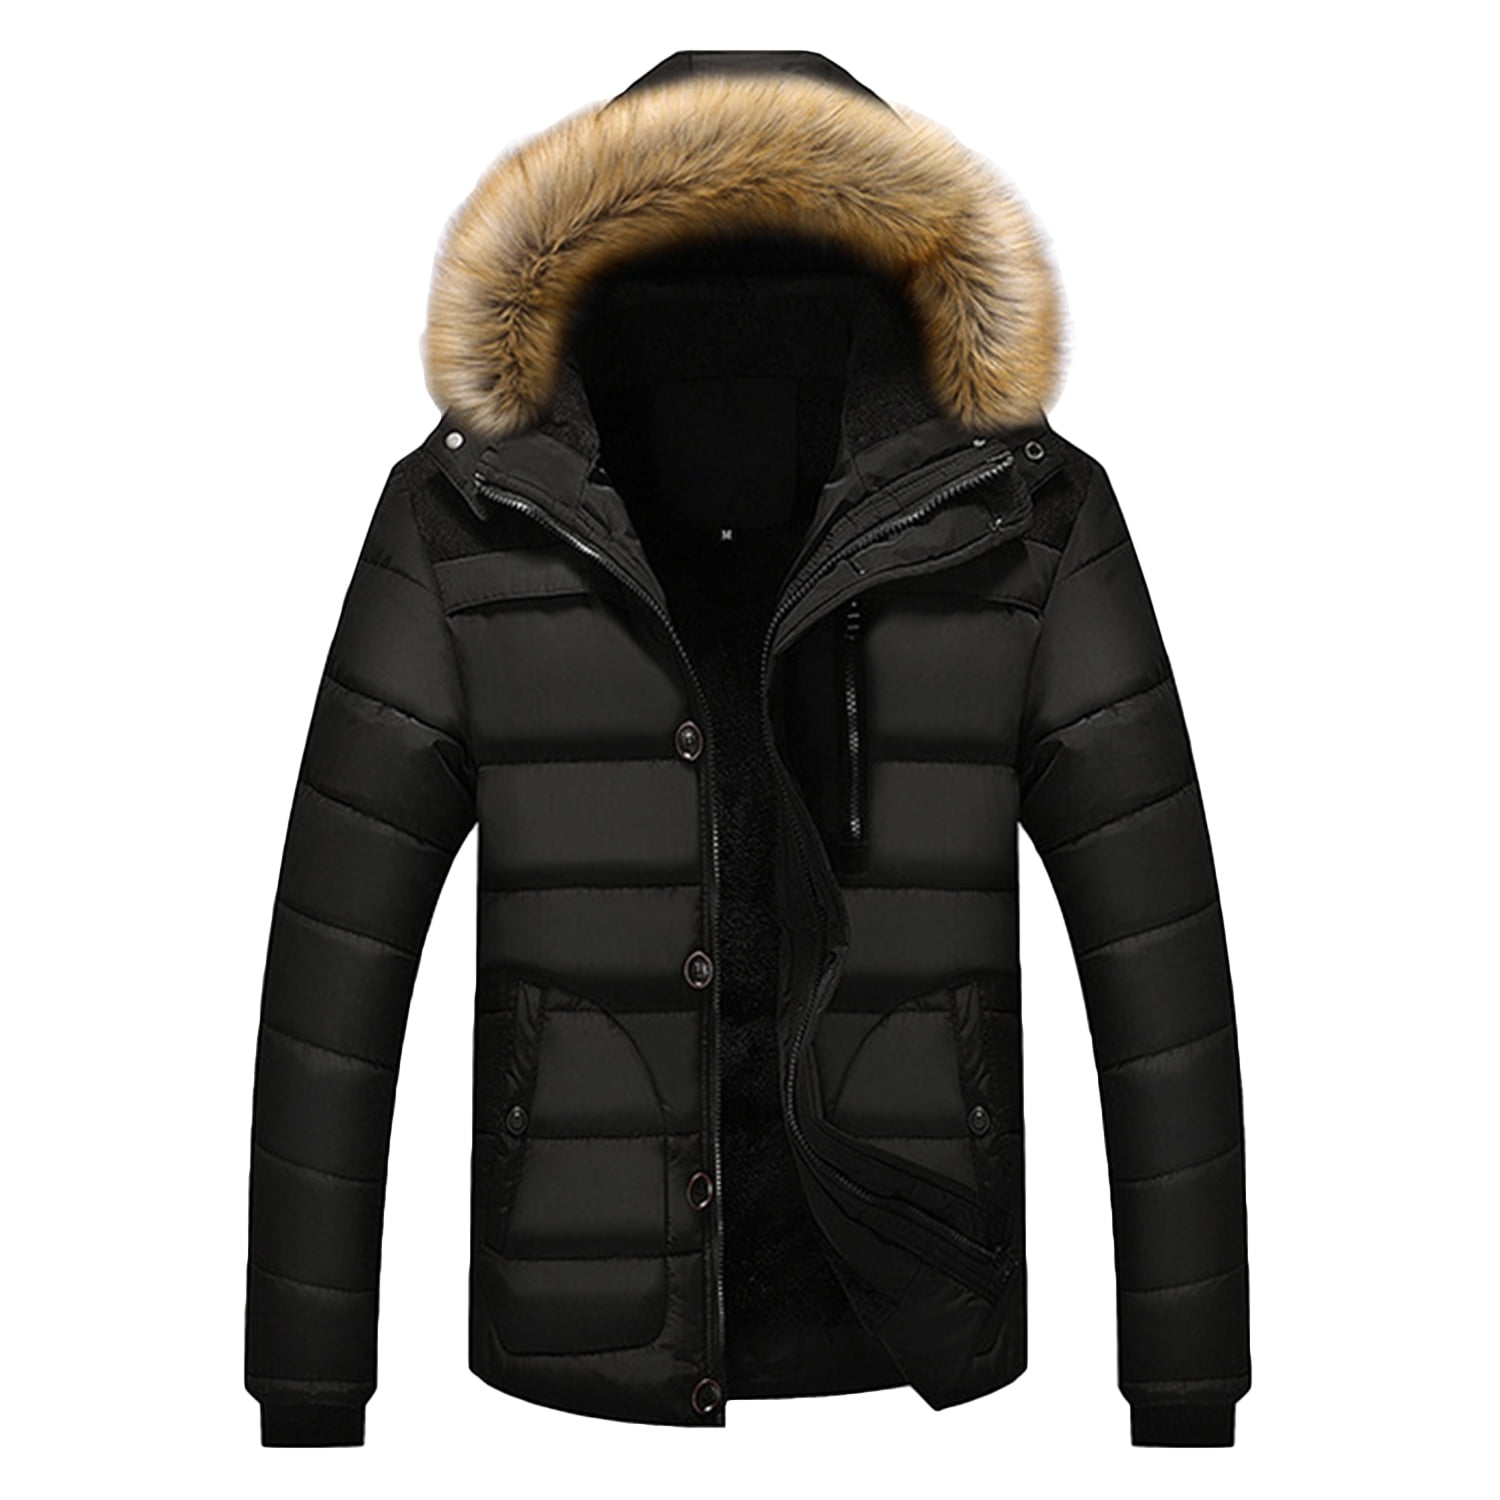 SWSMCLT Men's Jackets & Coats Winter Warm Faux Fur Hooded Quilted ...